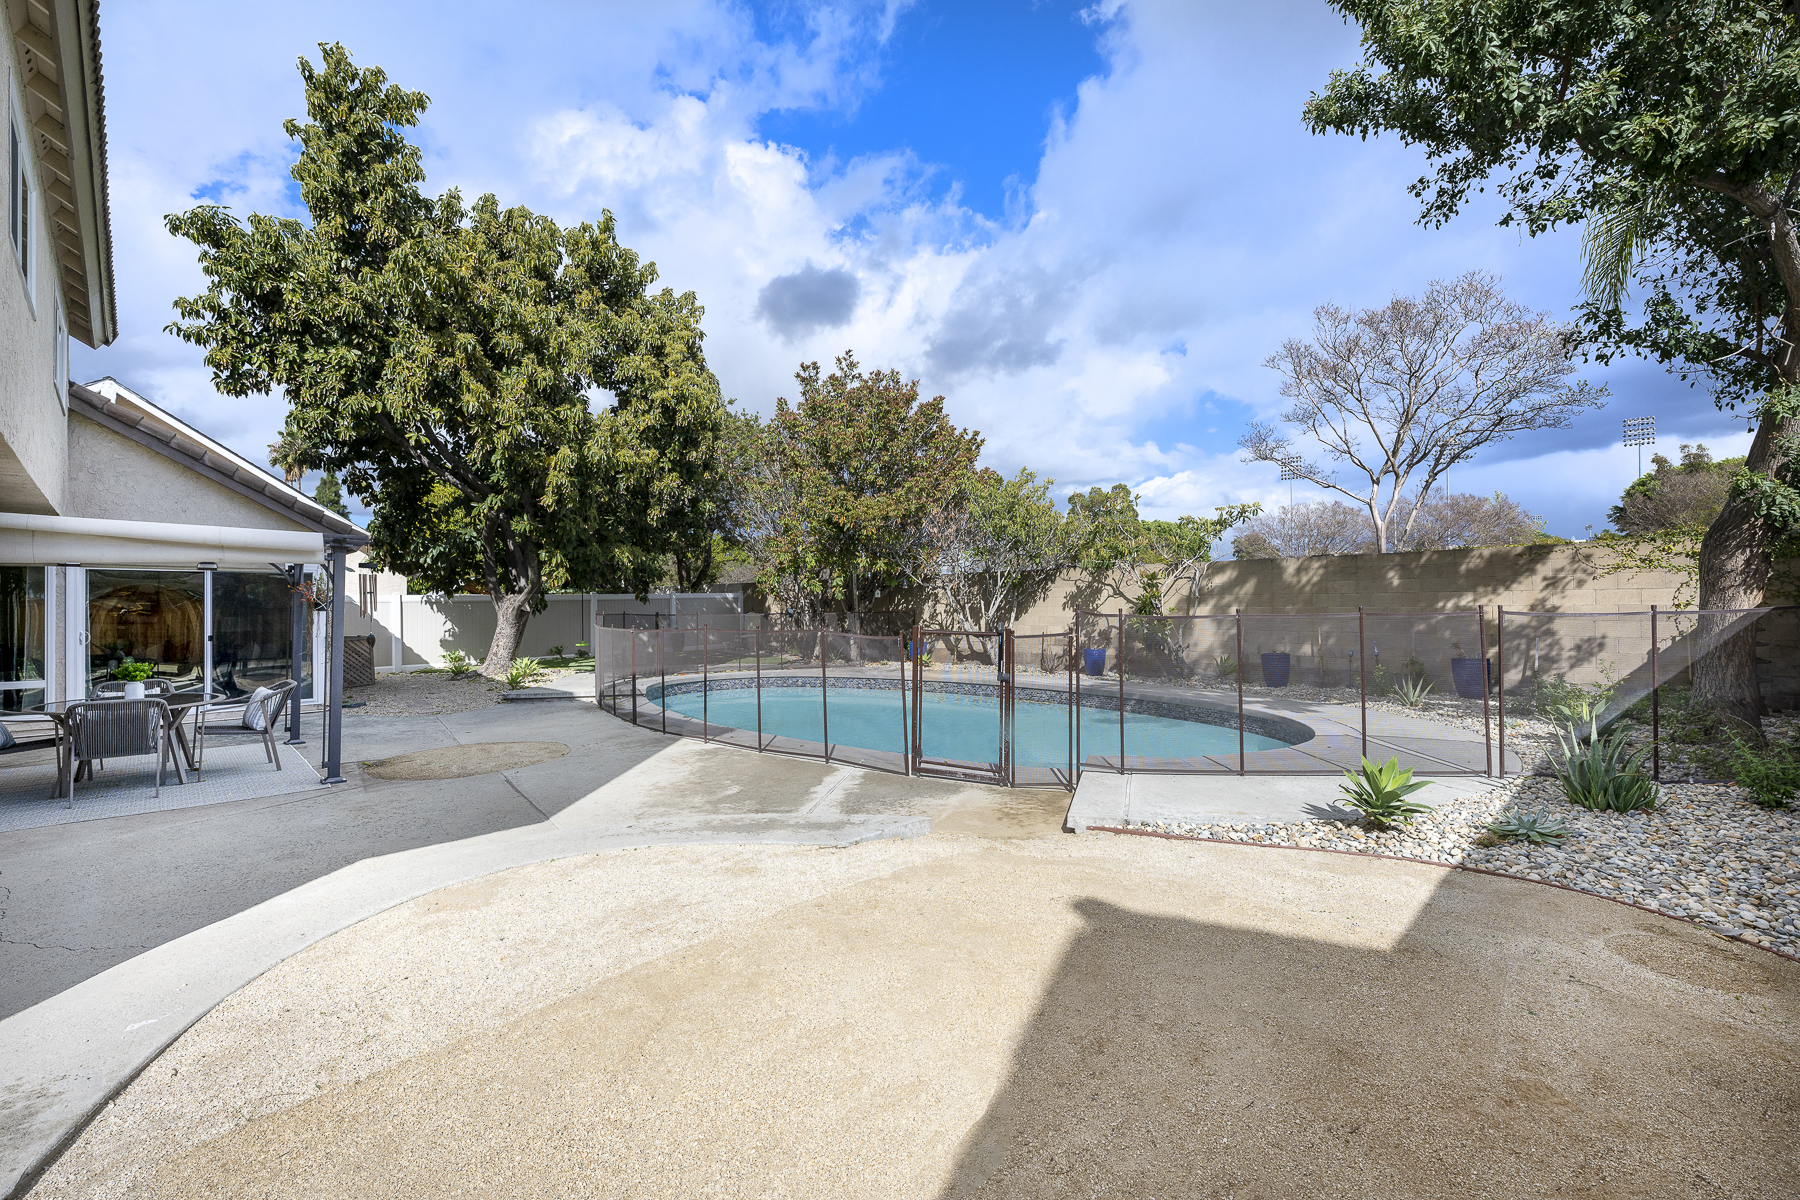 Backyard side view with concrete area, pool and surrounding gate, stone wall, and plants